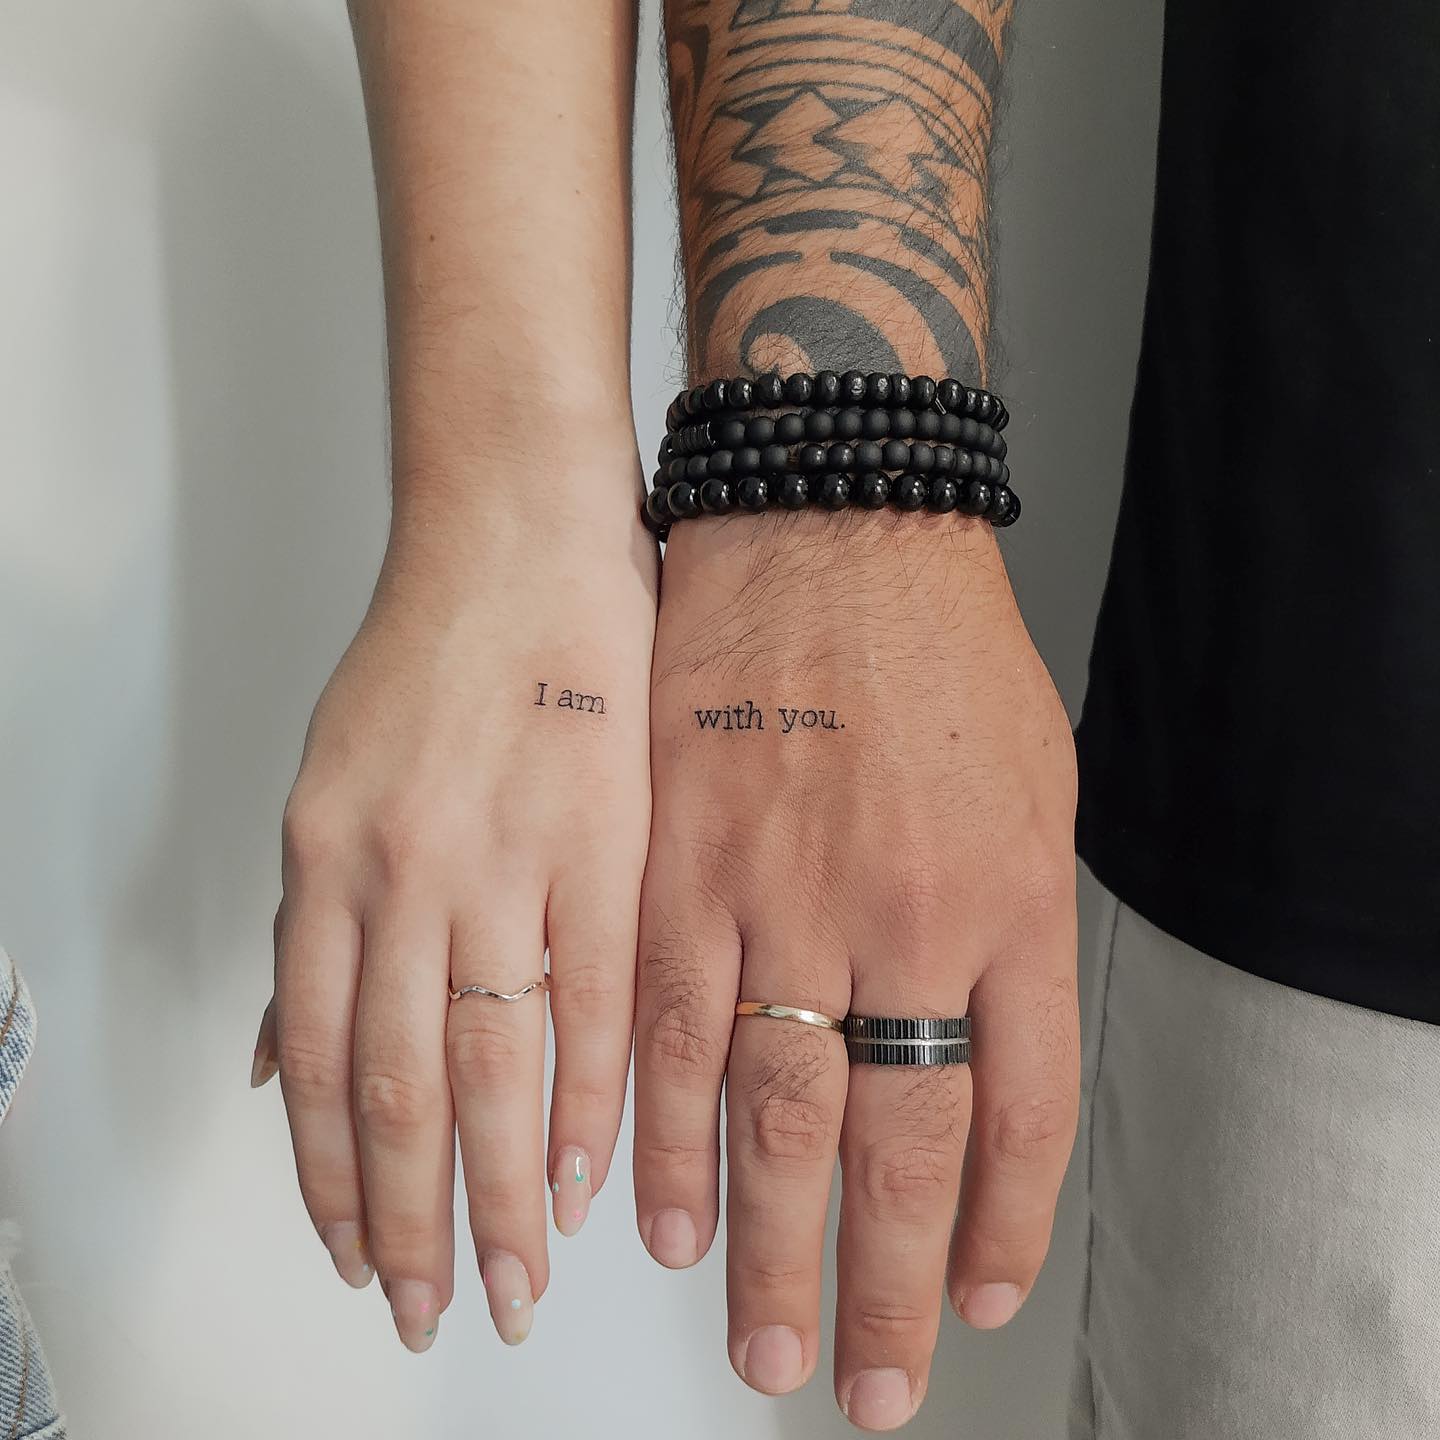 “I am with you” Tattoo for Couples on Hands